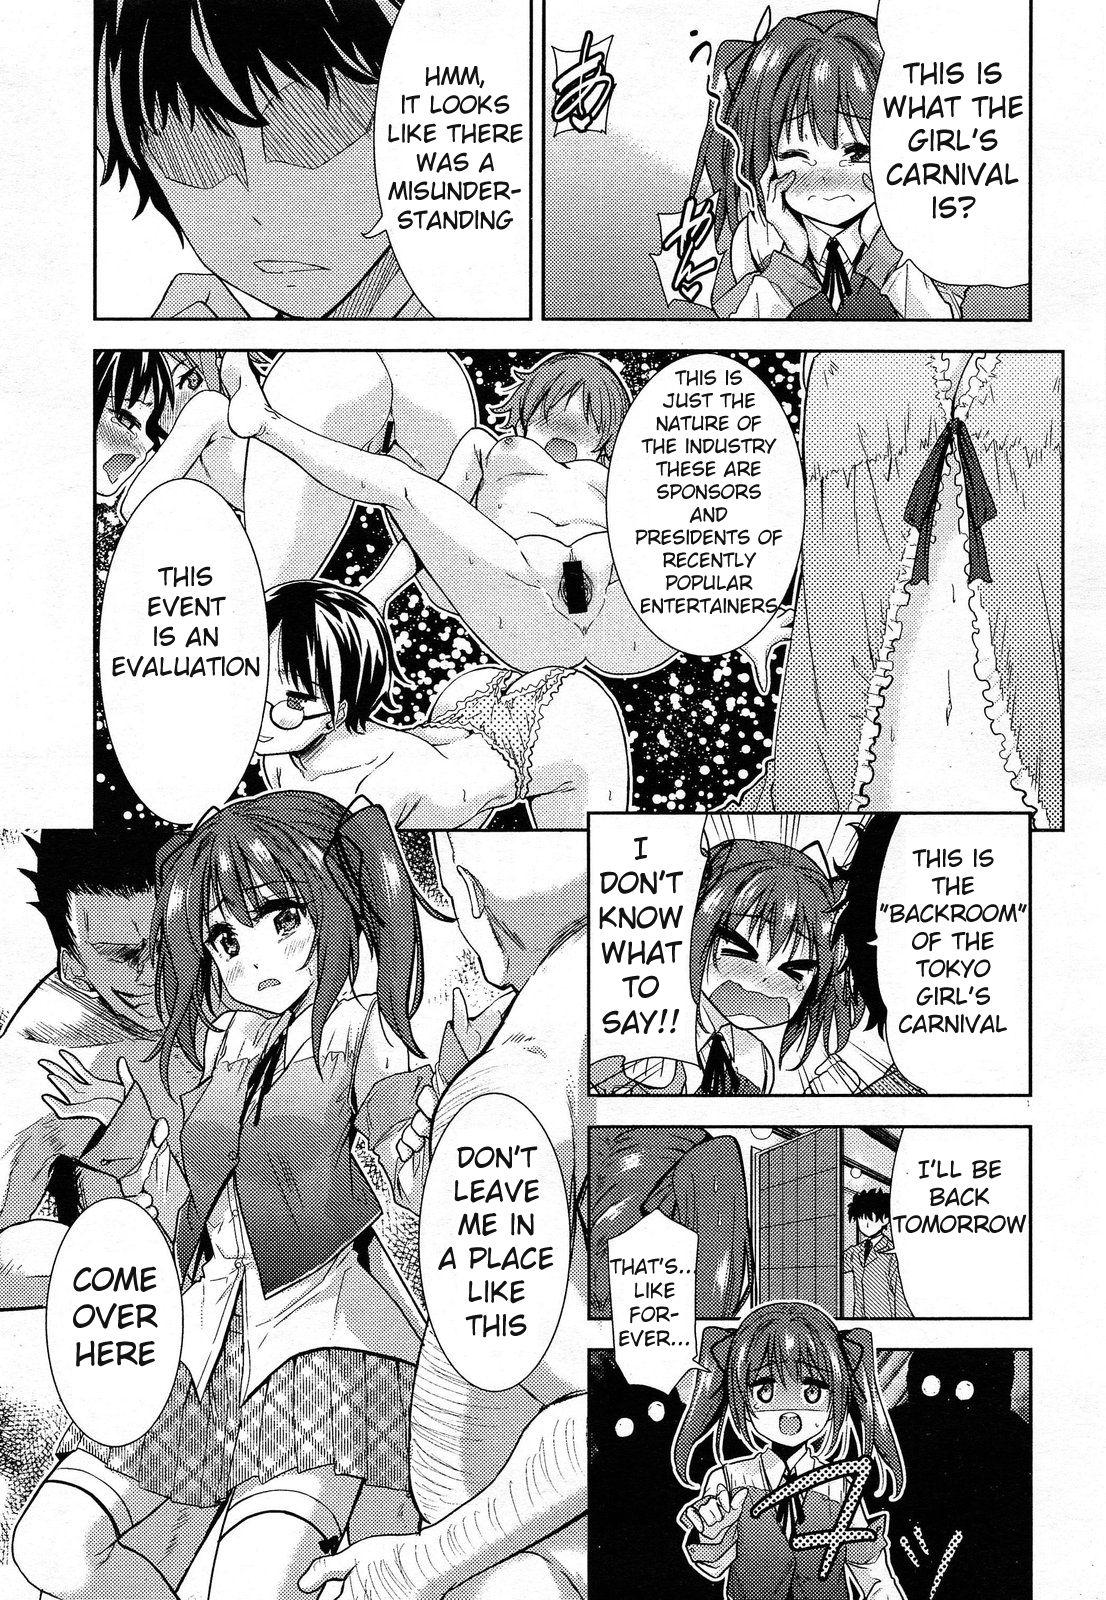 And Tokyo Girls Carnival Gay Money - Page 5